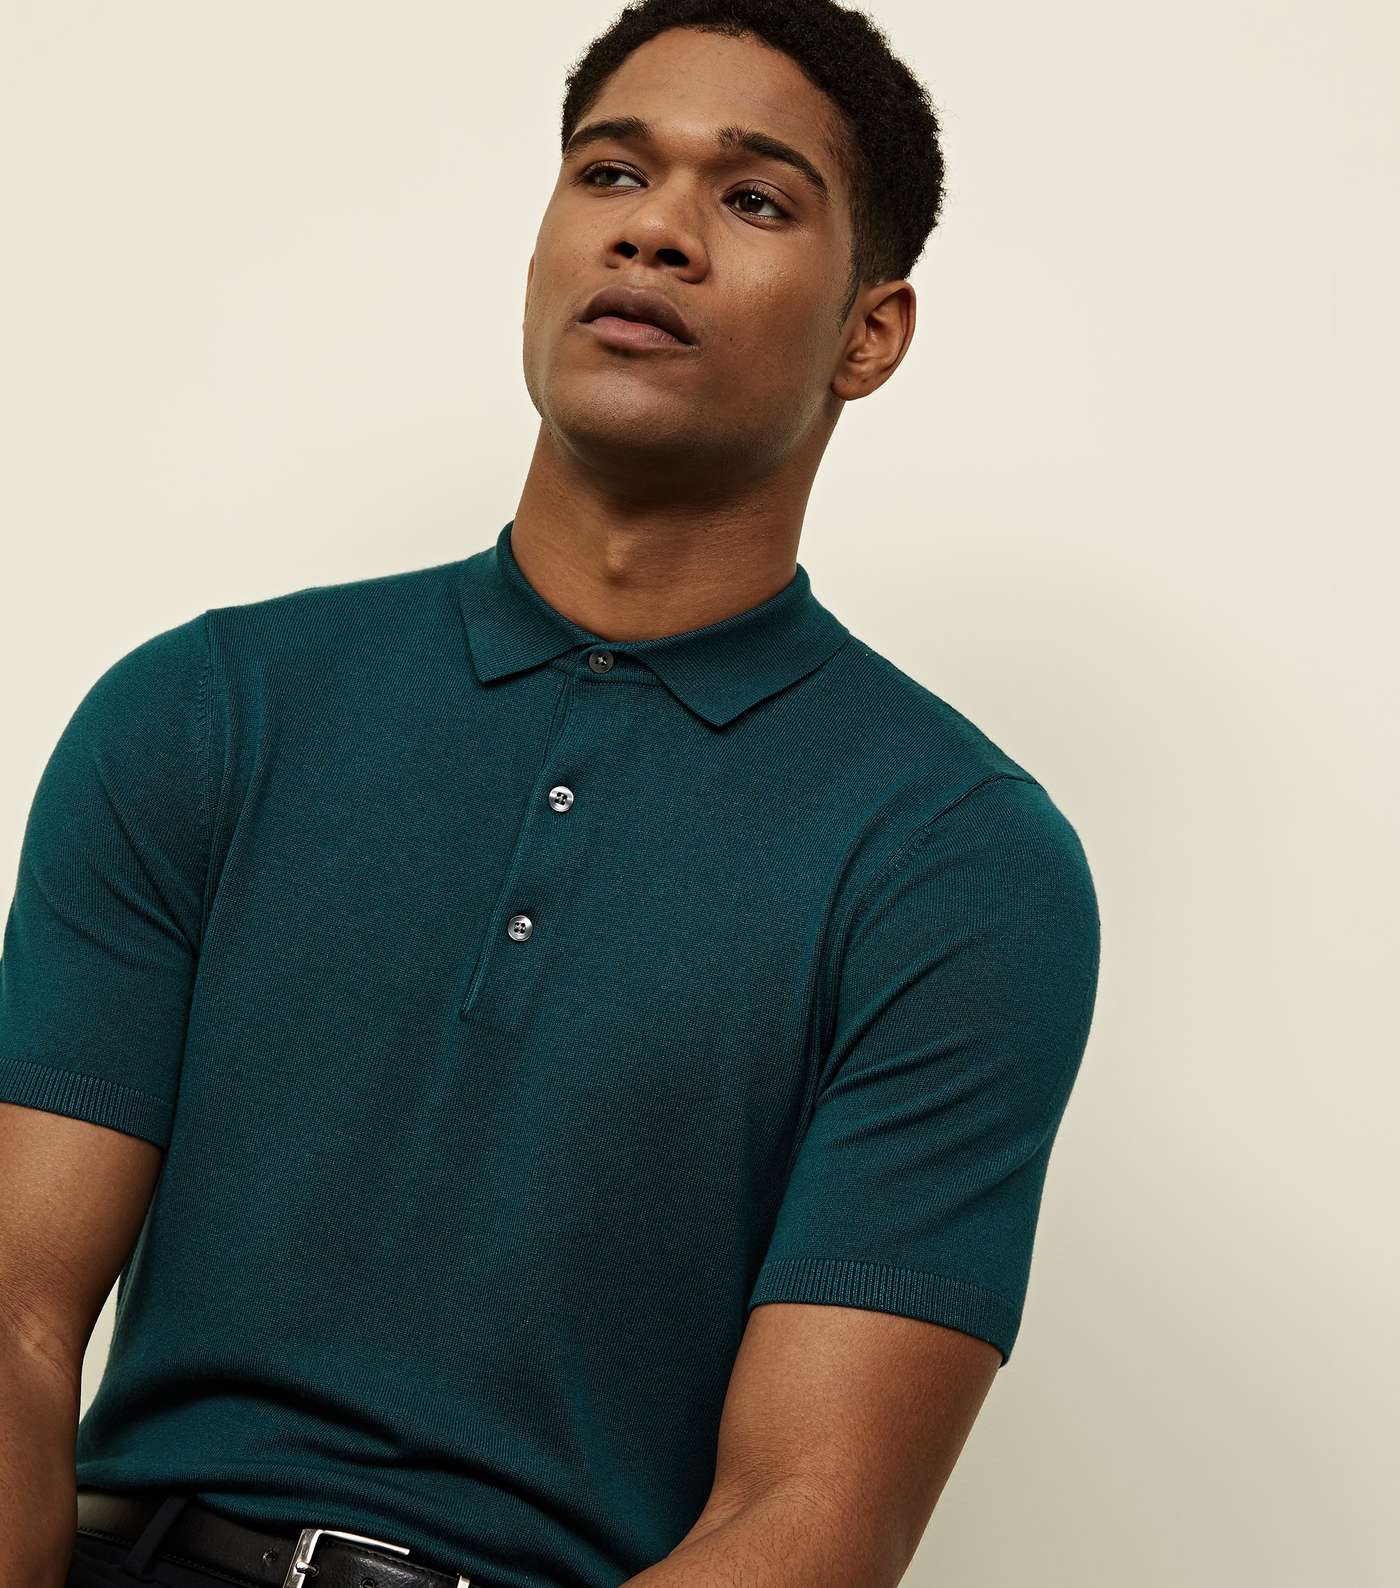 Teal Knit Muscle Fit Polo Shirt Image 6